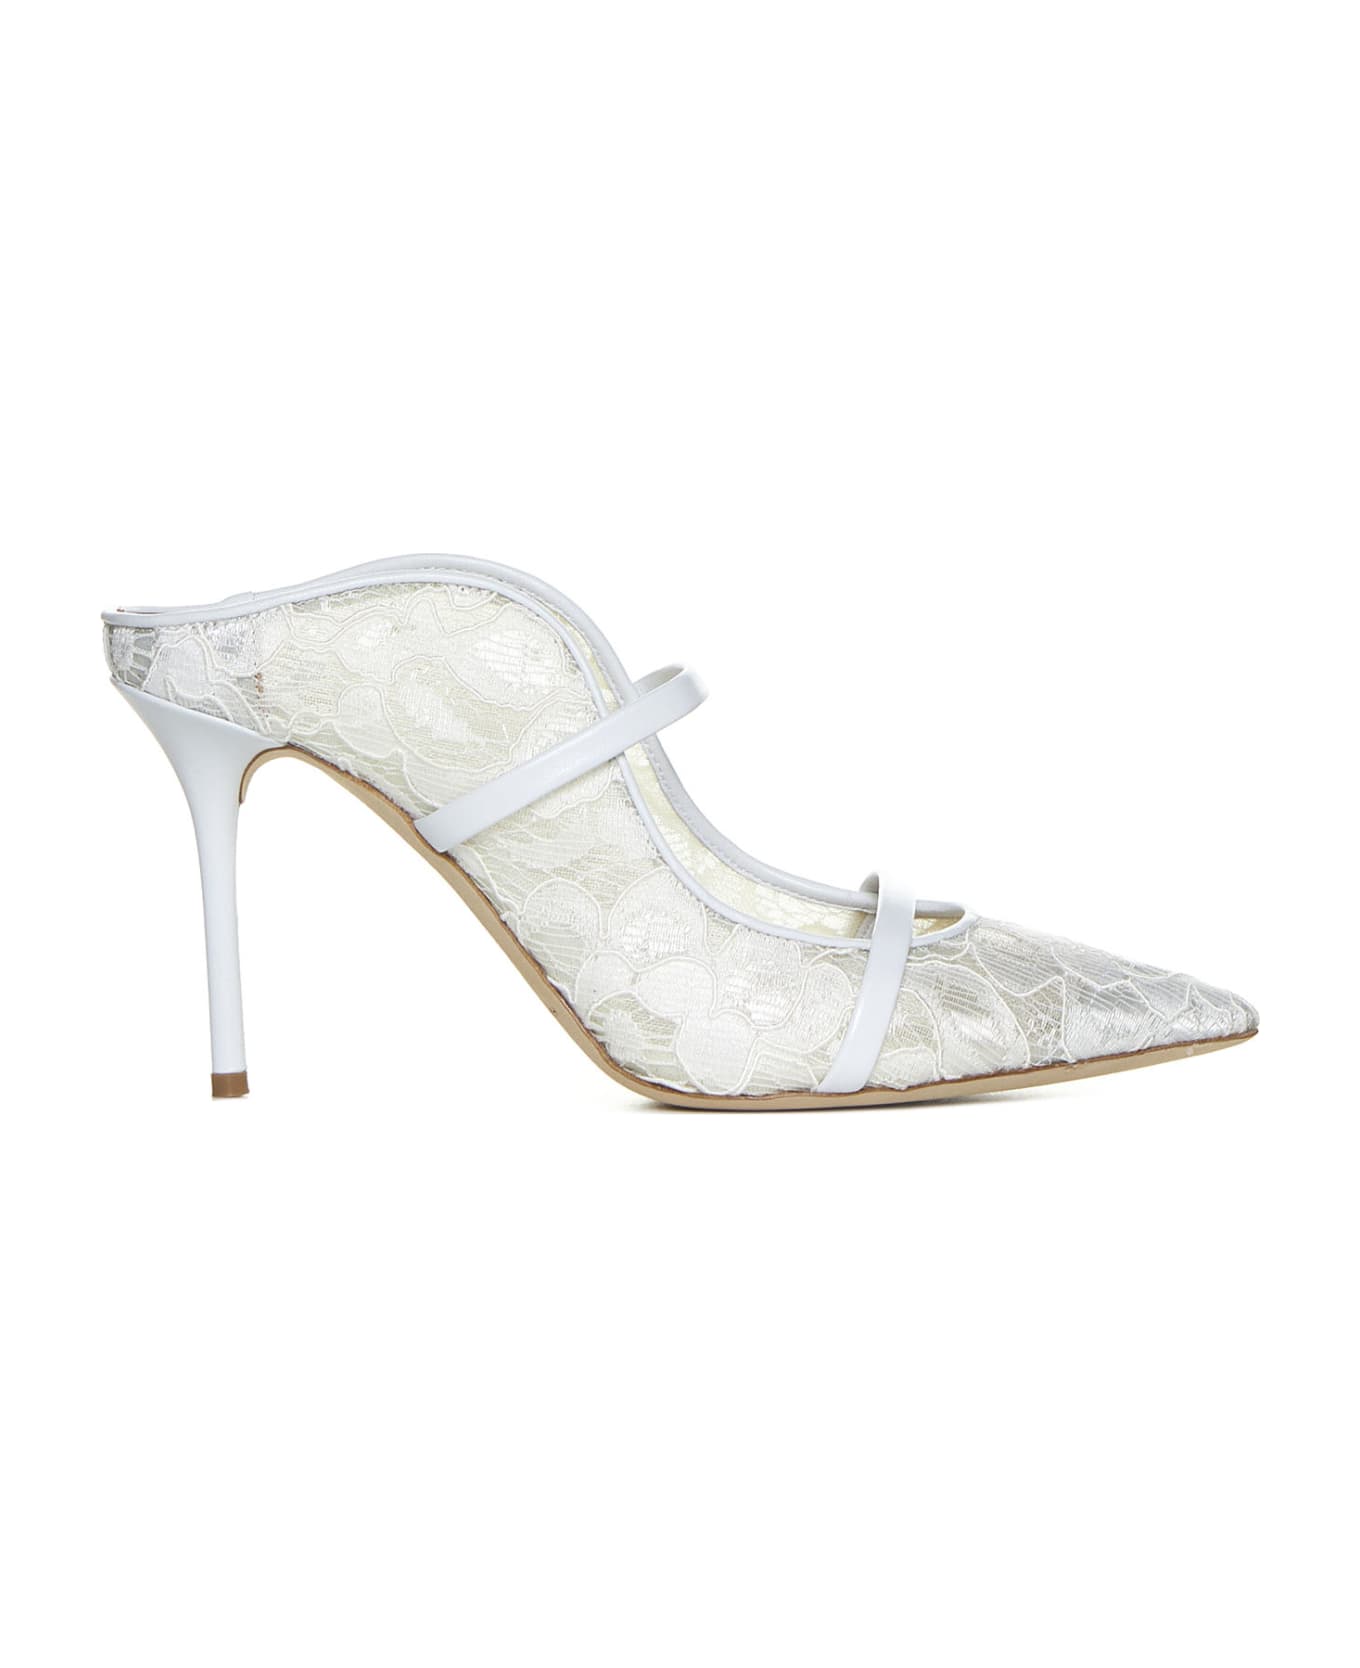 Malone Souliers Sandals - White/white